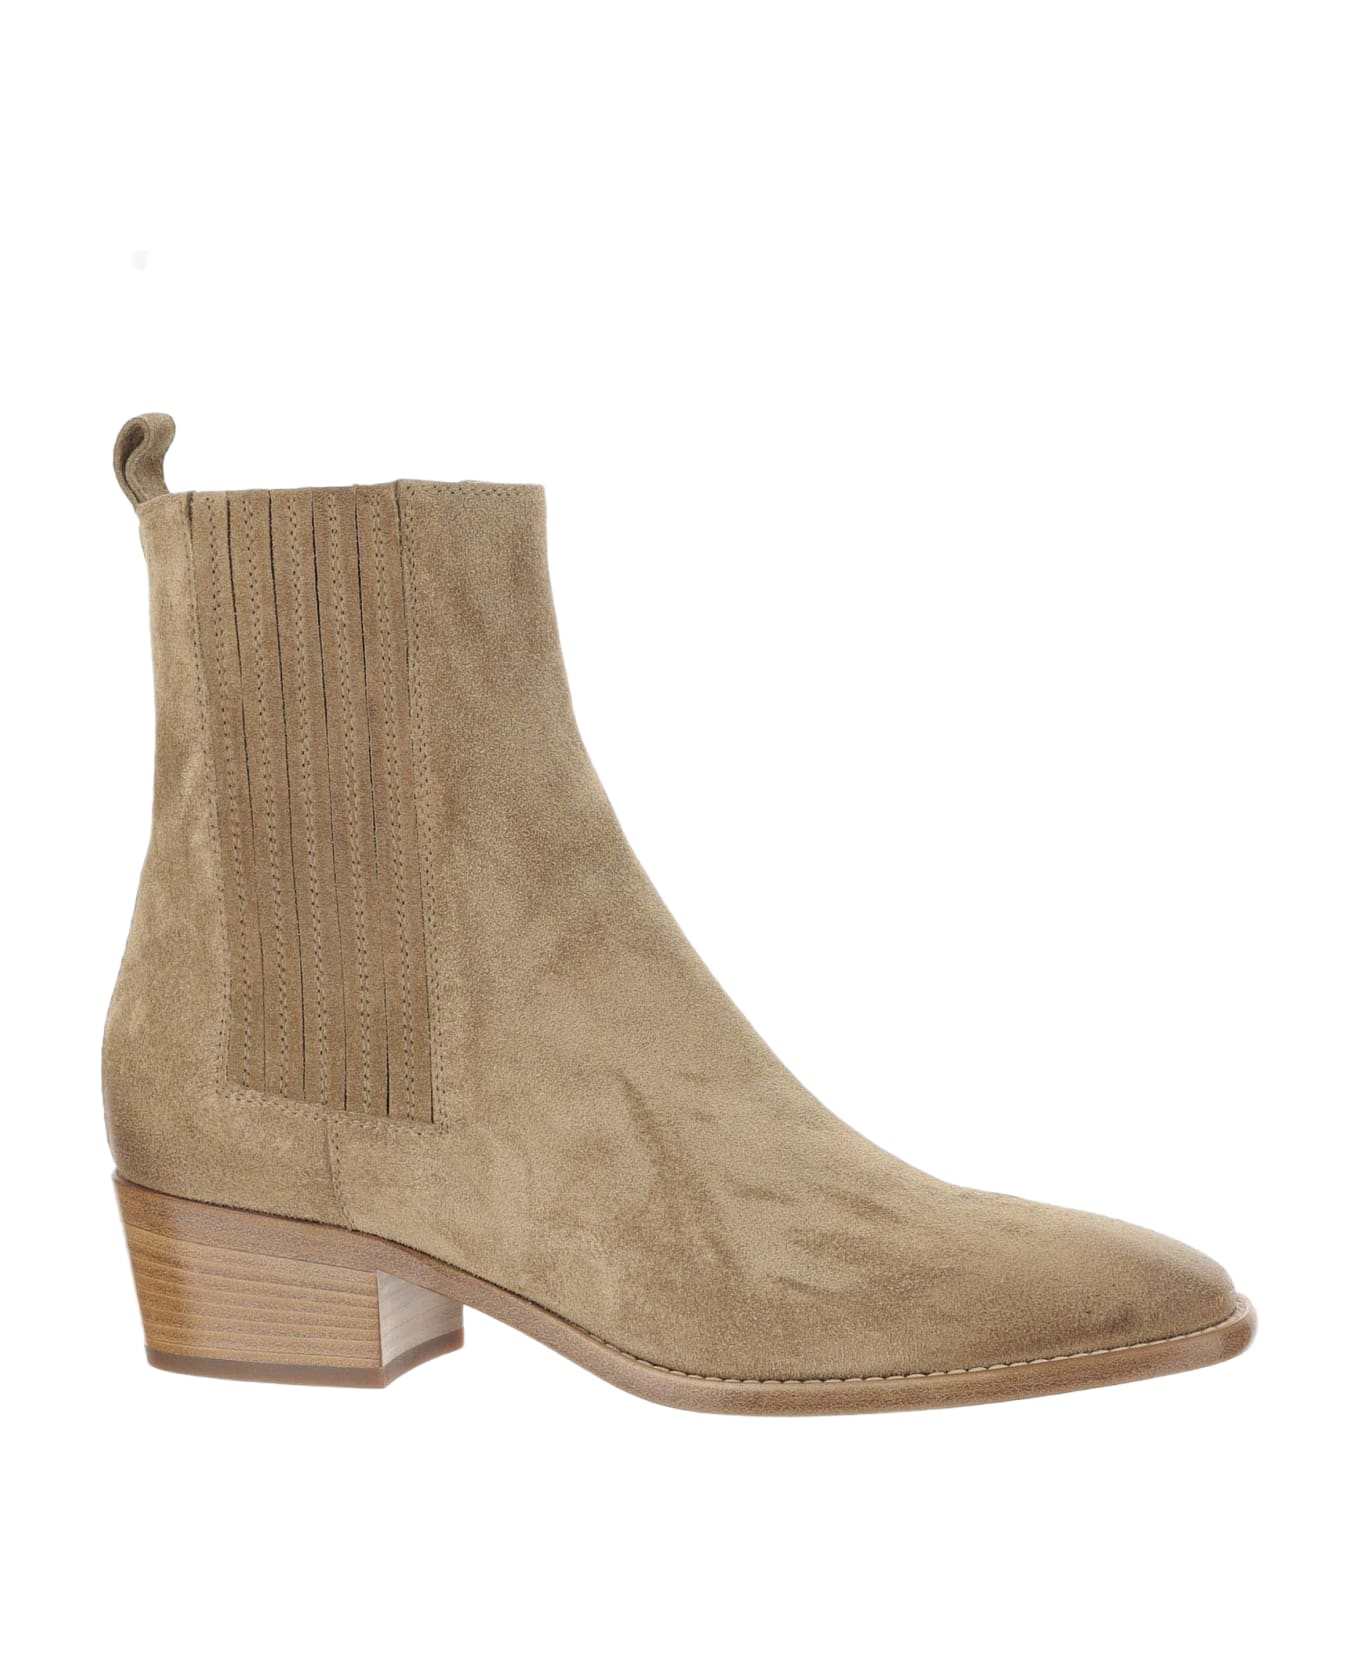 Sartore Suede Ankle Boots - Beige